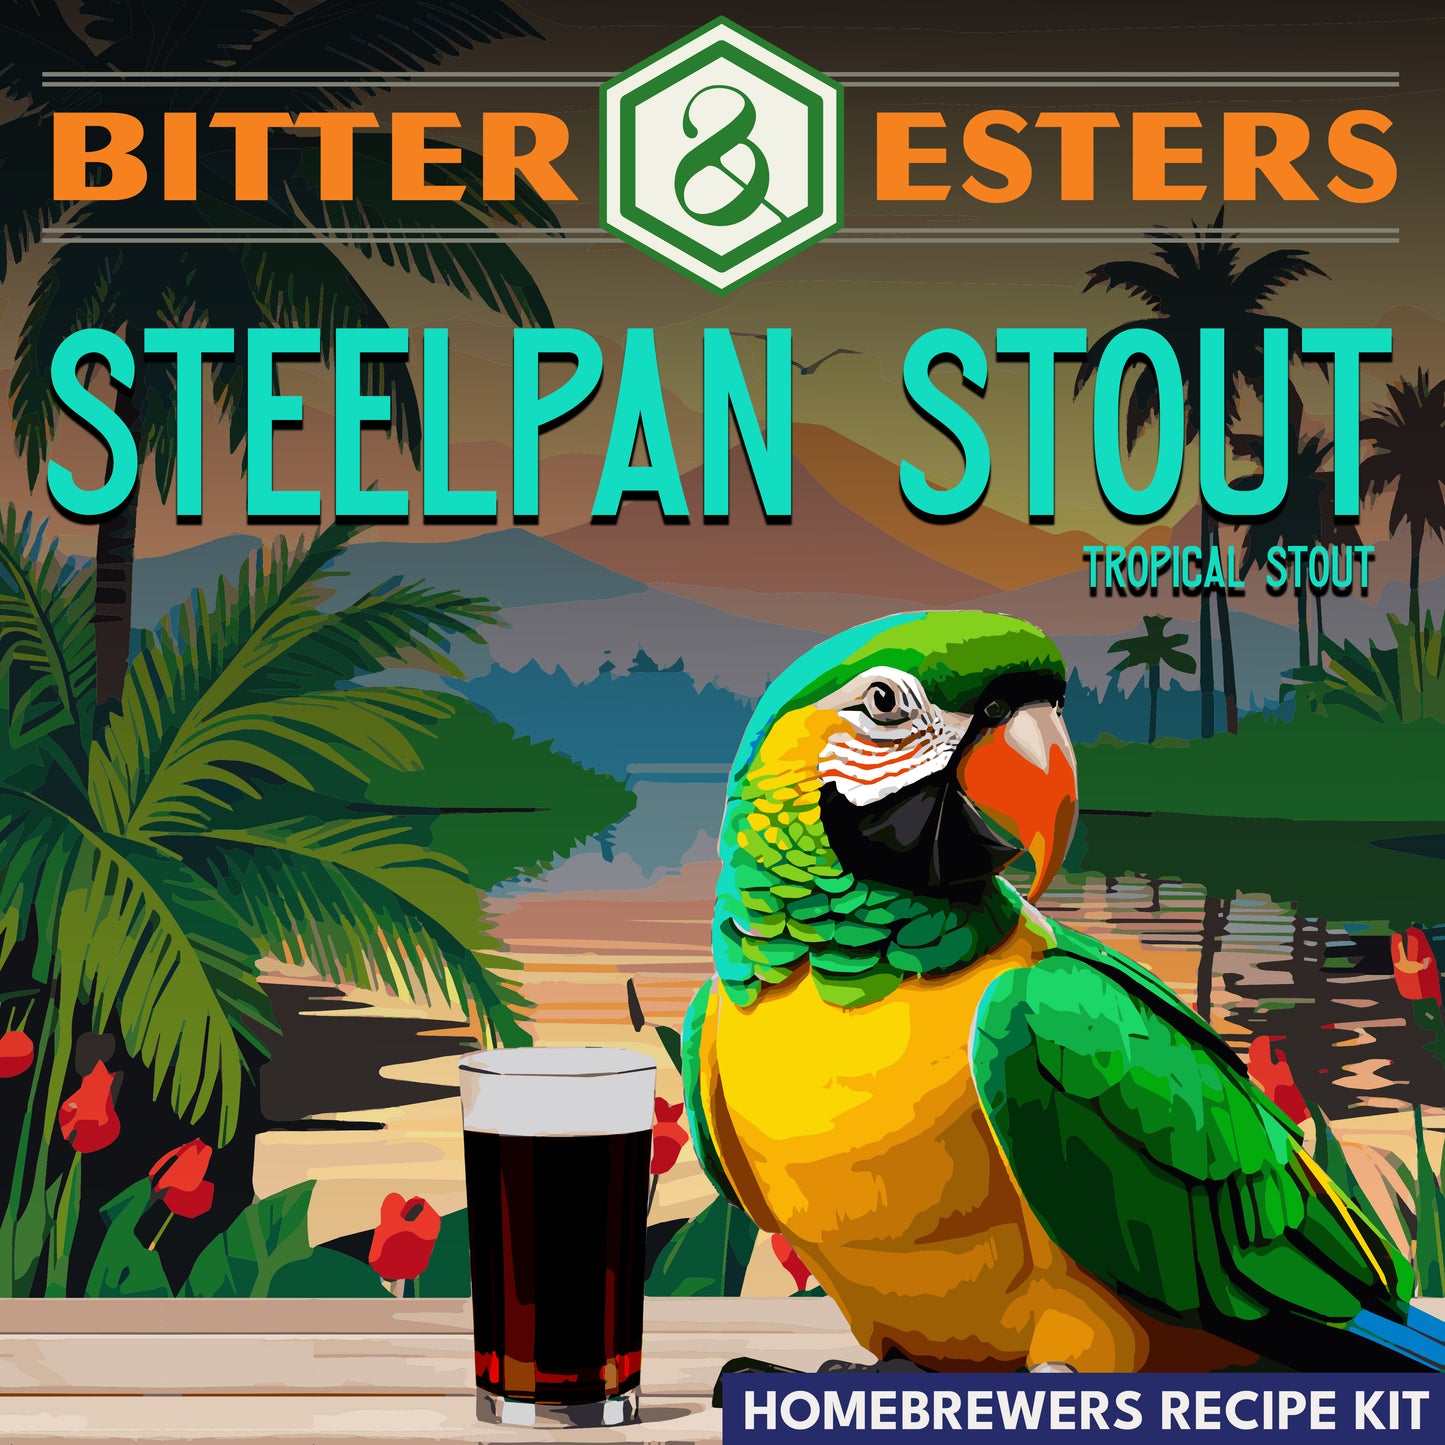 Steelpan Stout - Tropical Stout - Homebrewers Recipe Kit